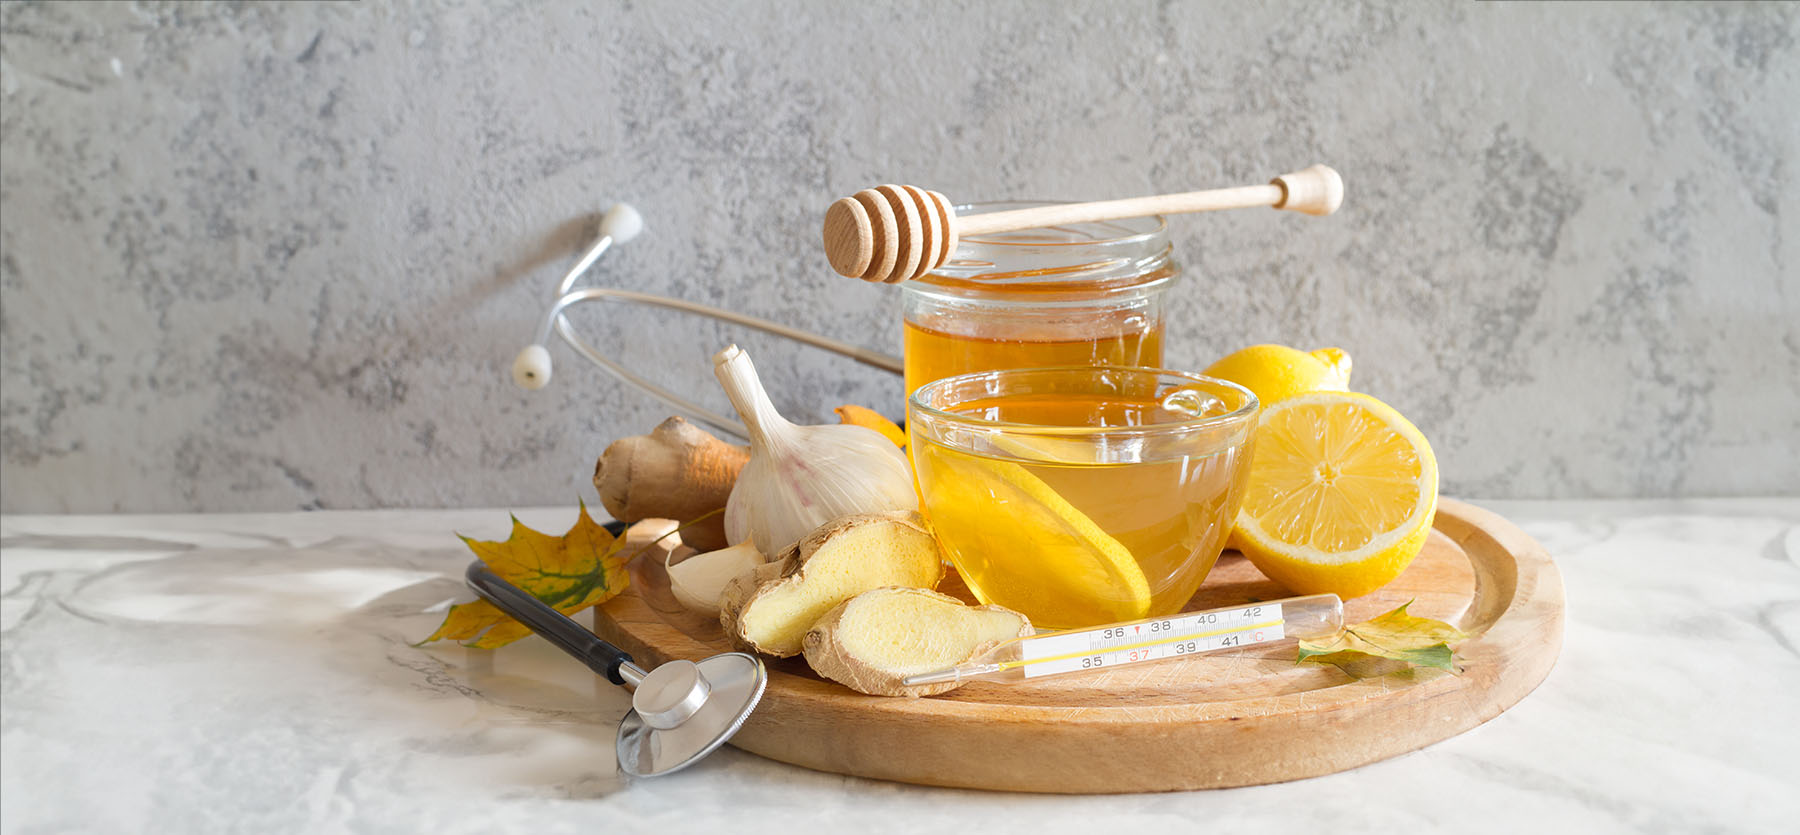 Picture of honey, lemon, onion and other natural remedies wrapped in a stethoscope. Set against a grey stone backdrop.